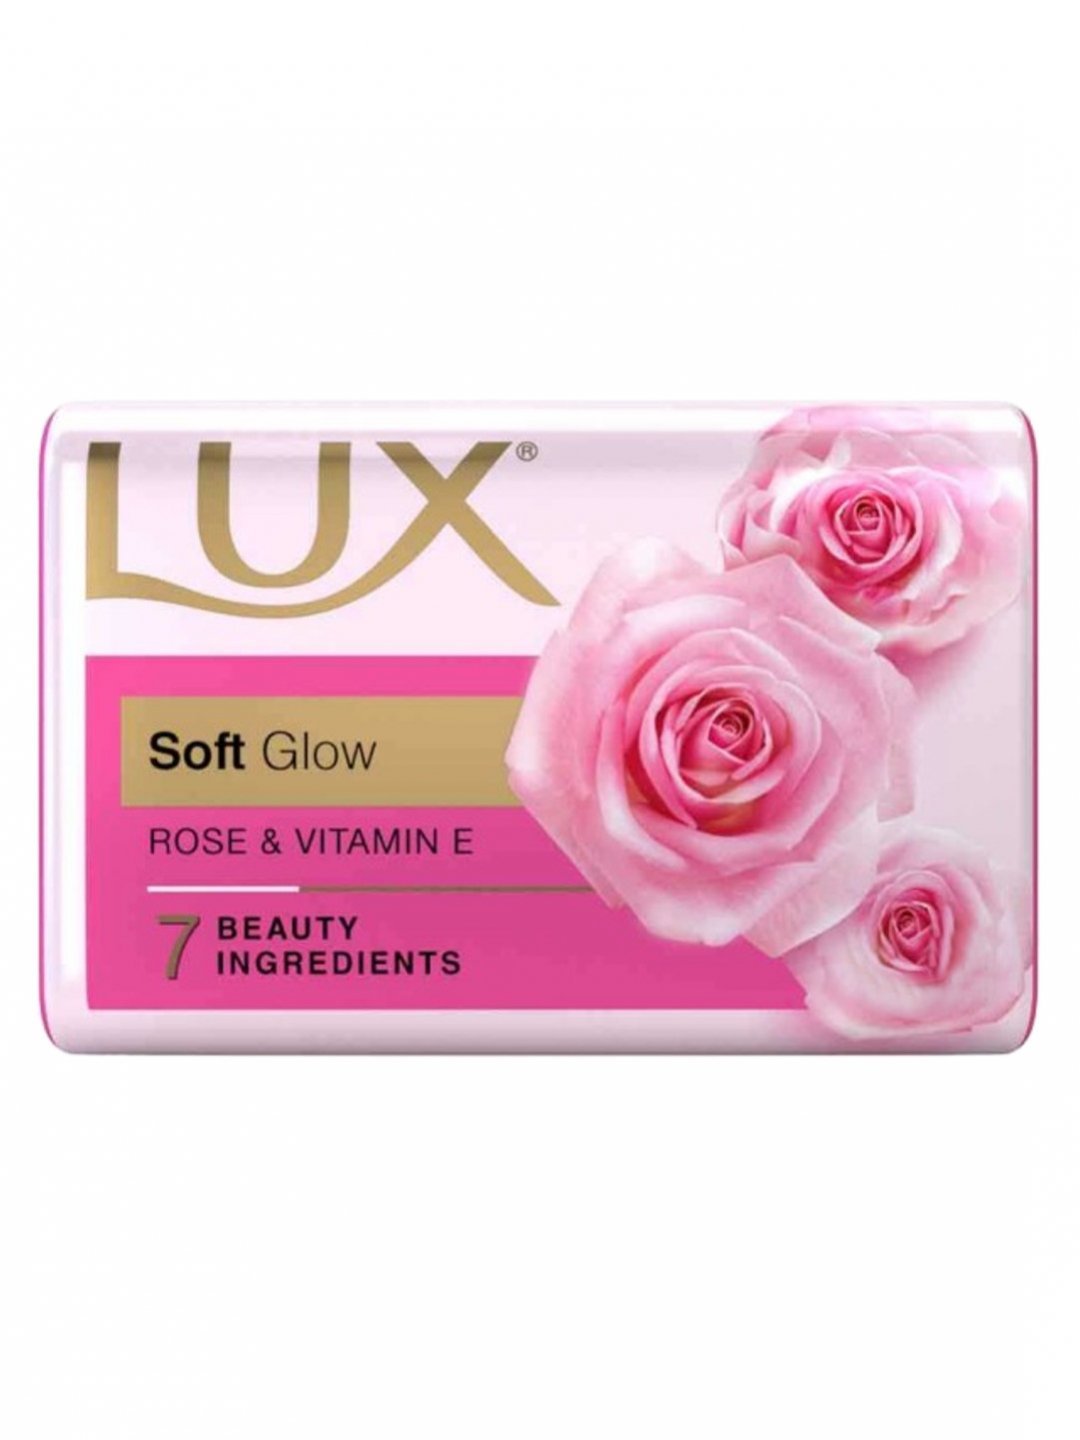 Lux Soft Glow with Rose & Vitamin E Soap, 100g (Pack of 3)